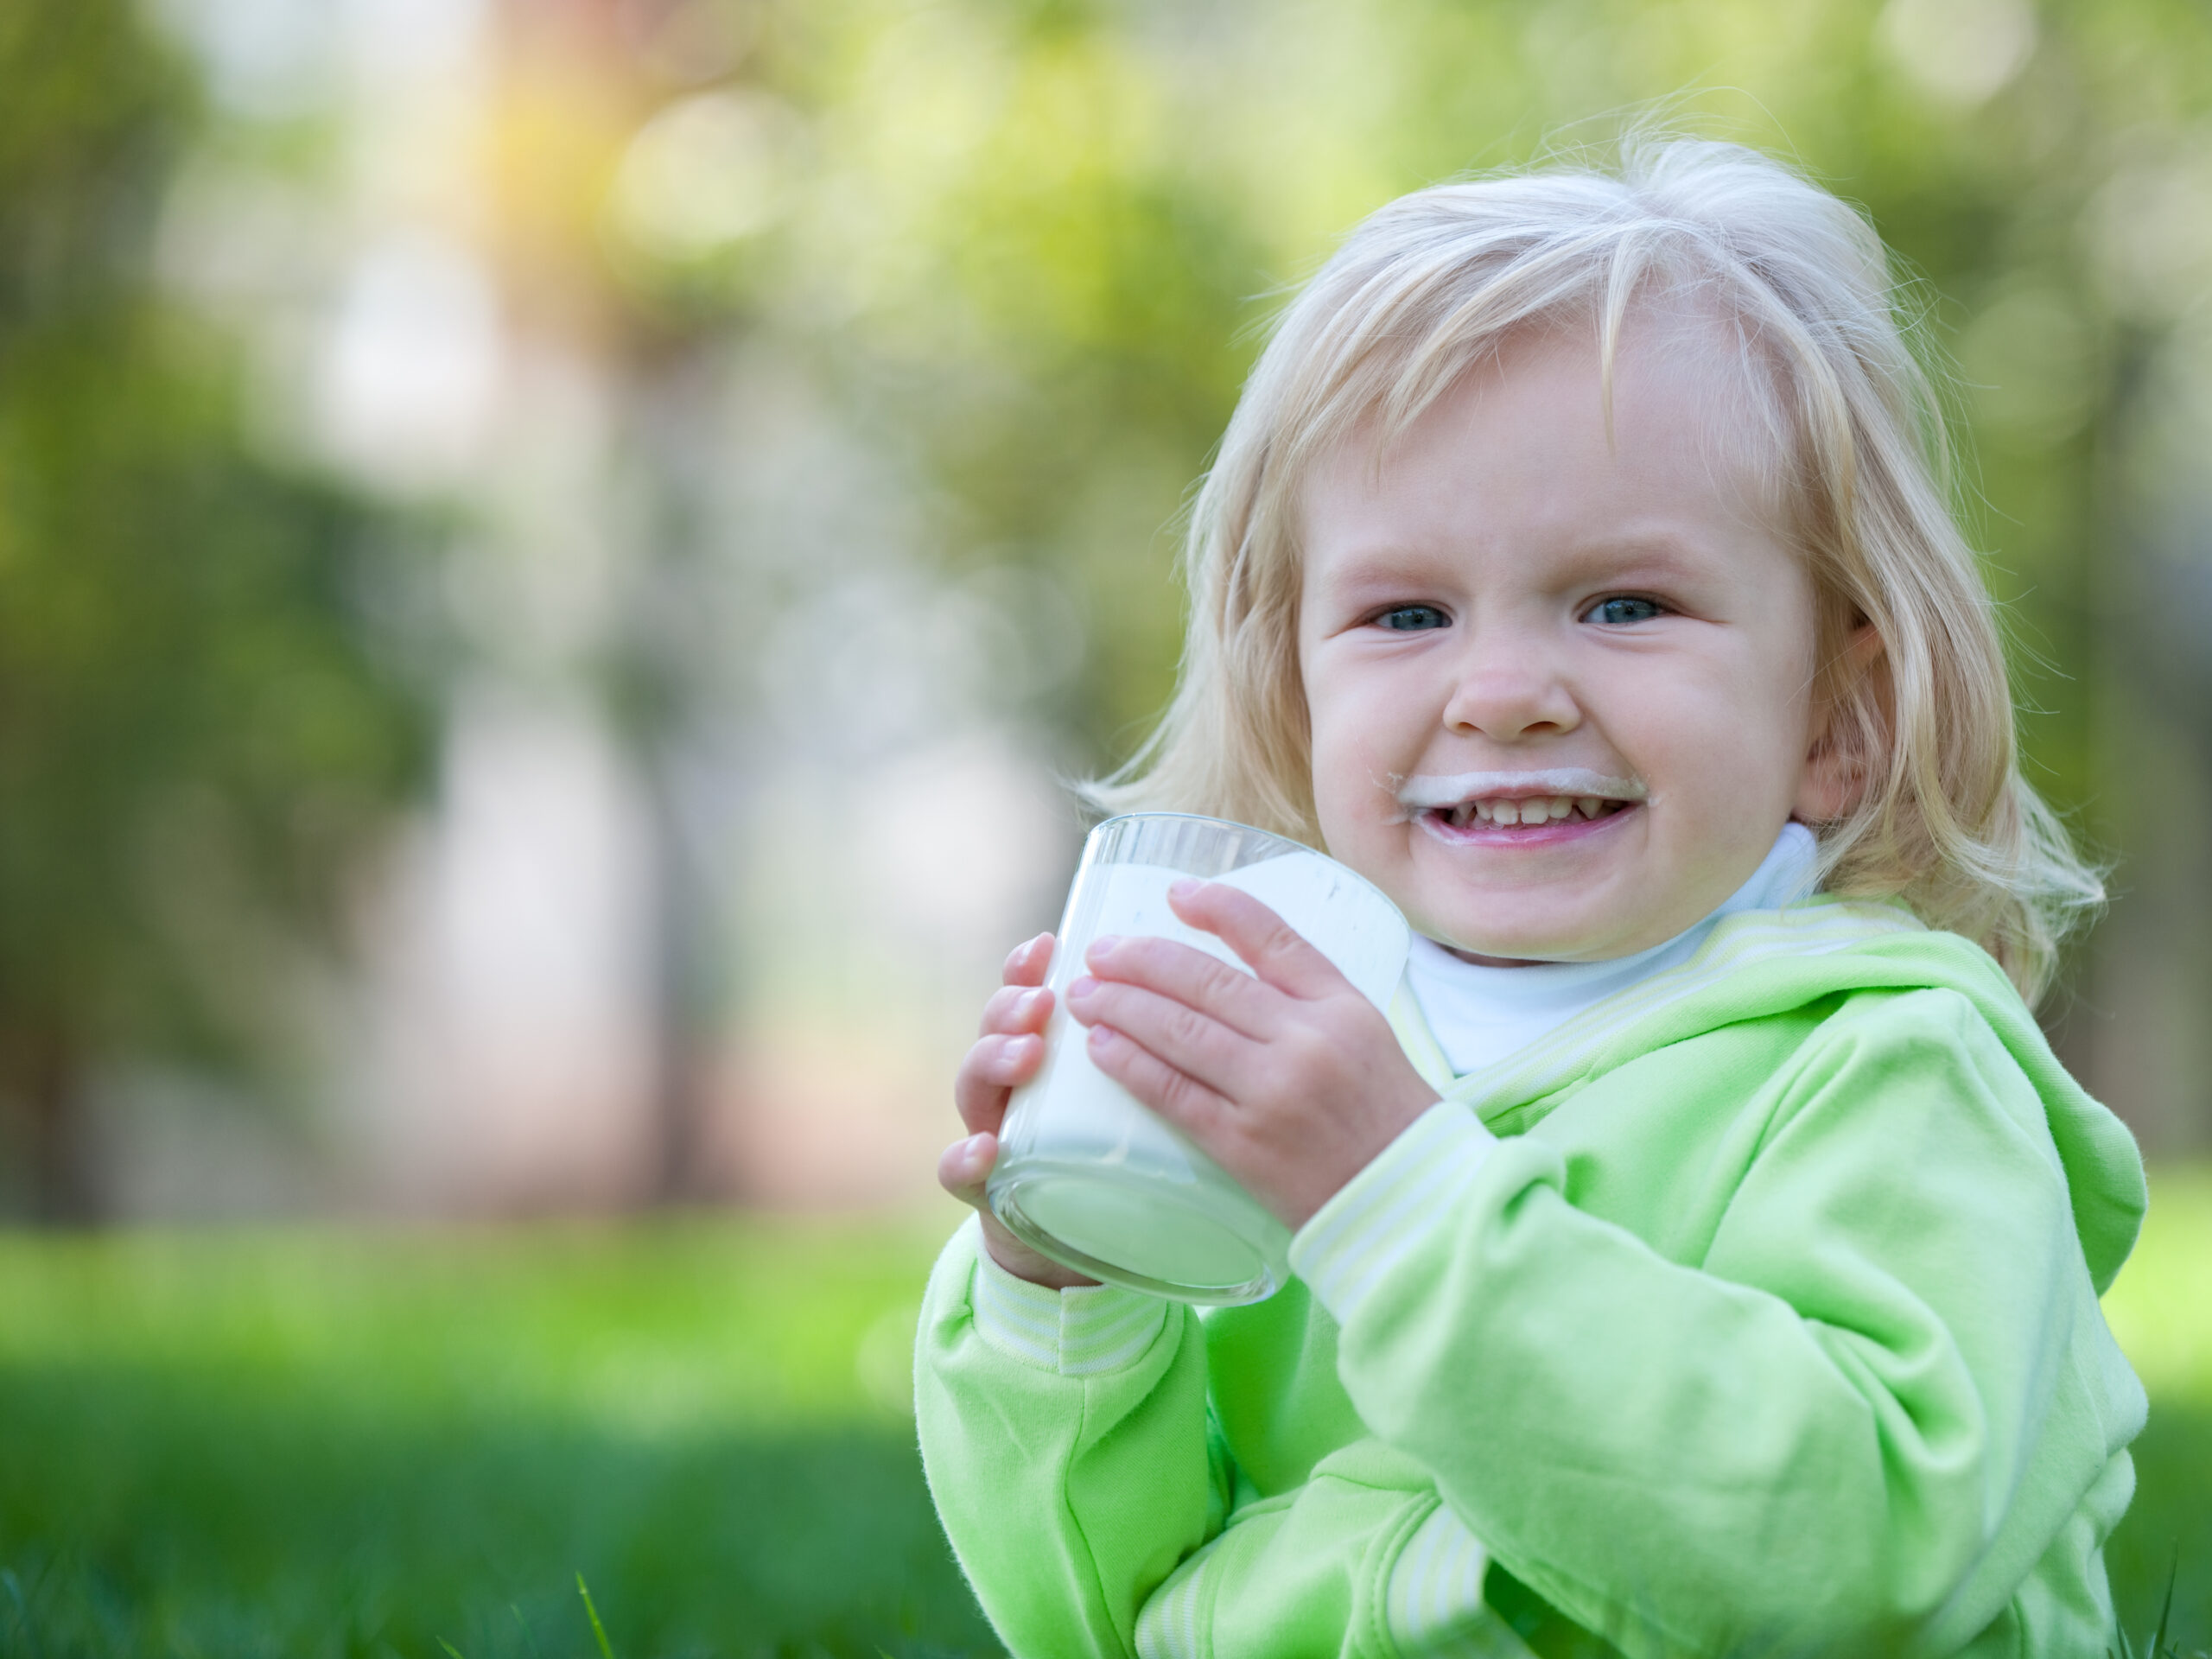 Blonde toddler drinking a glass of milk in the garden outdoors